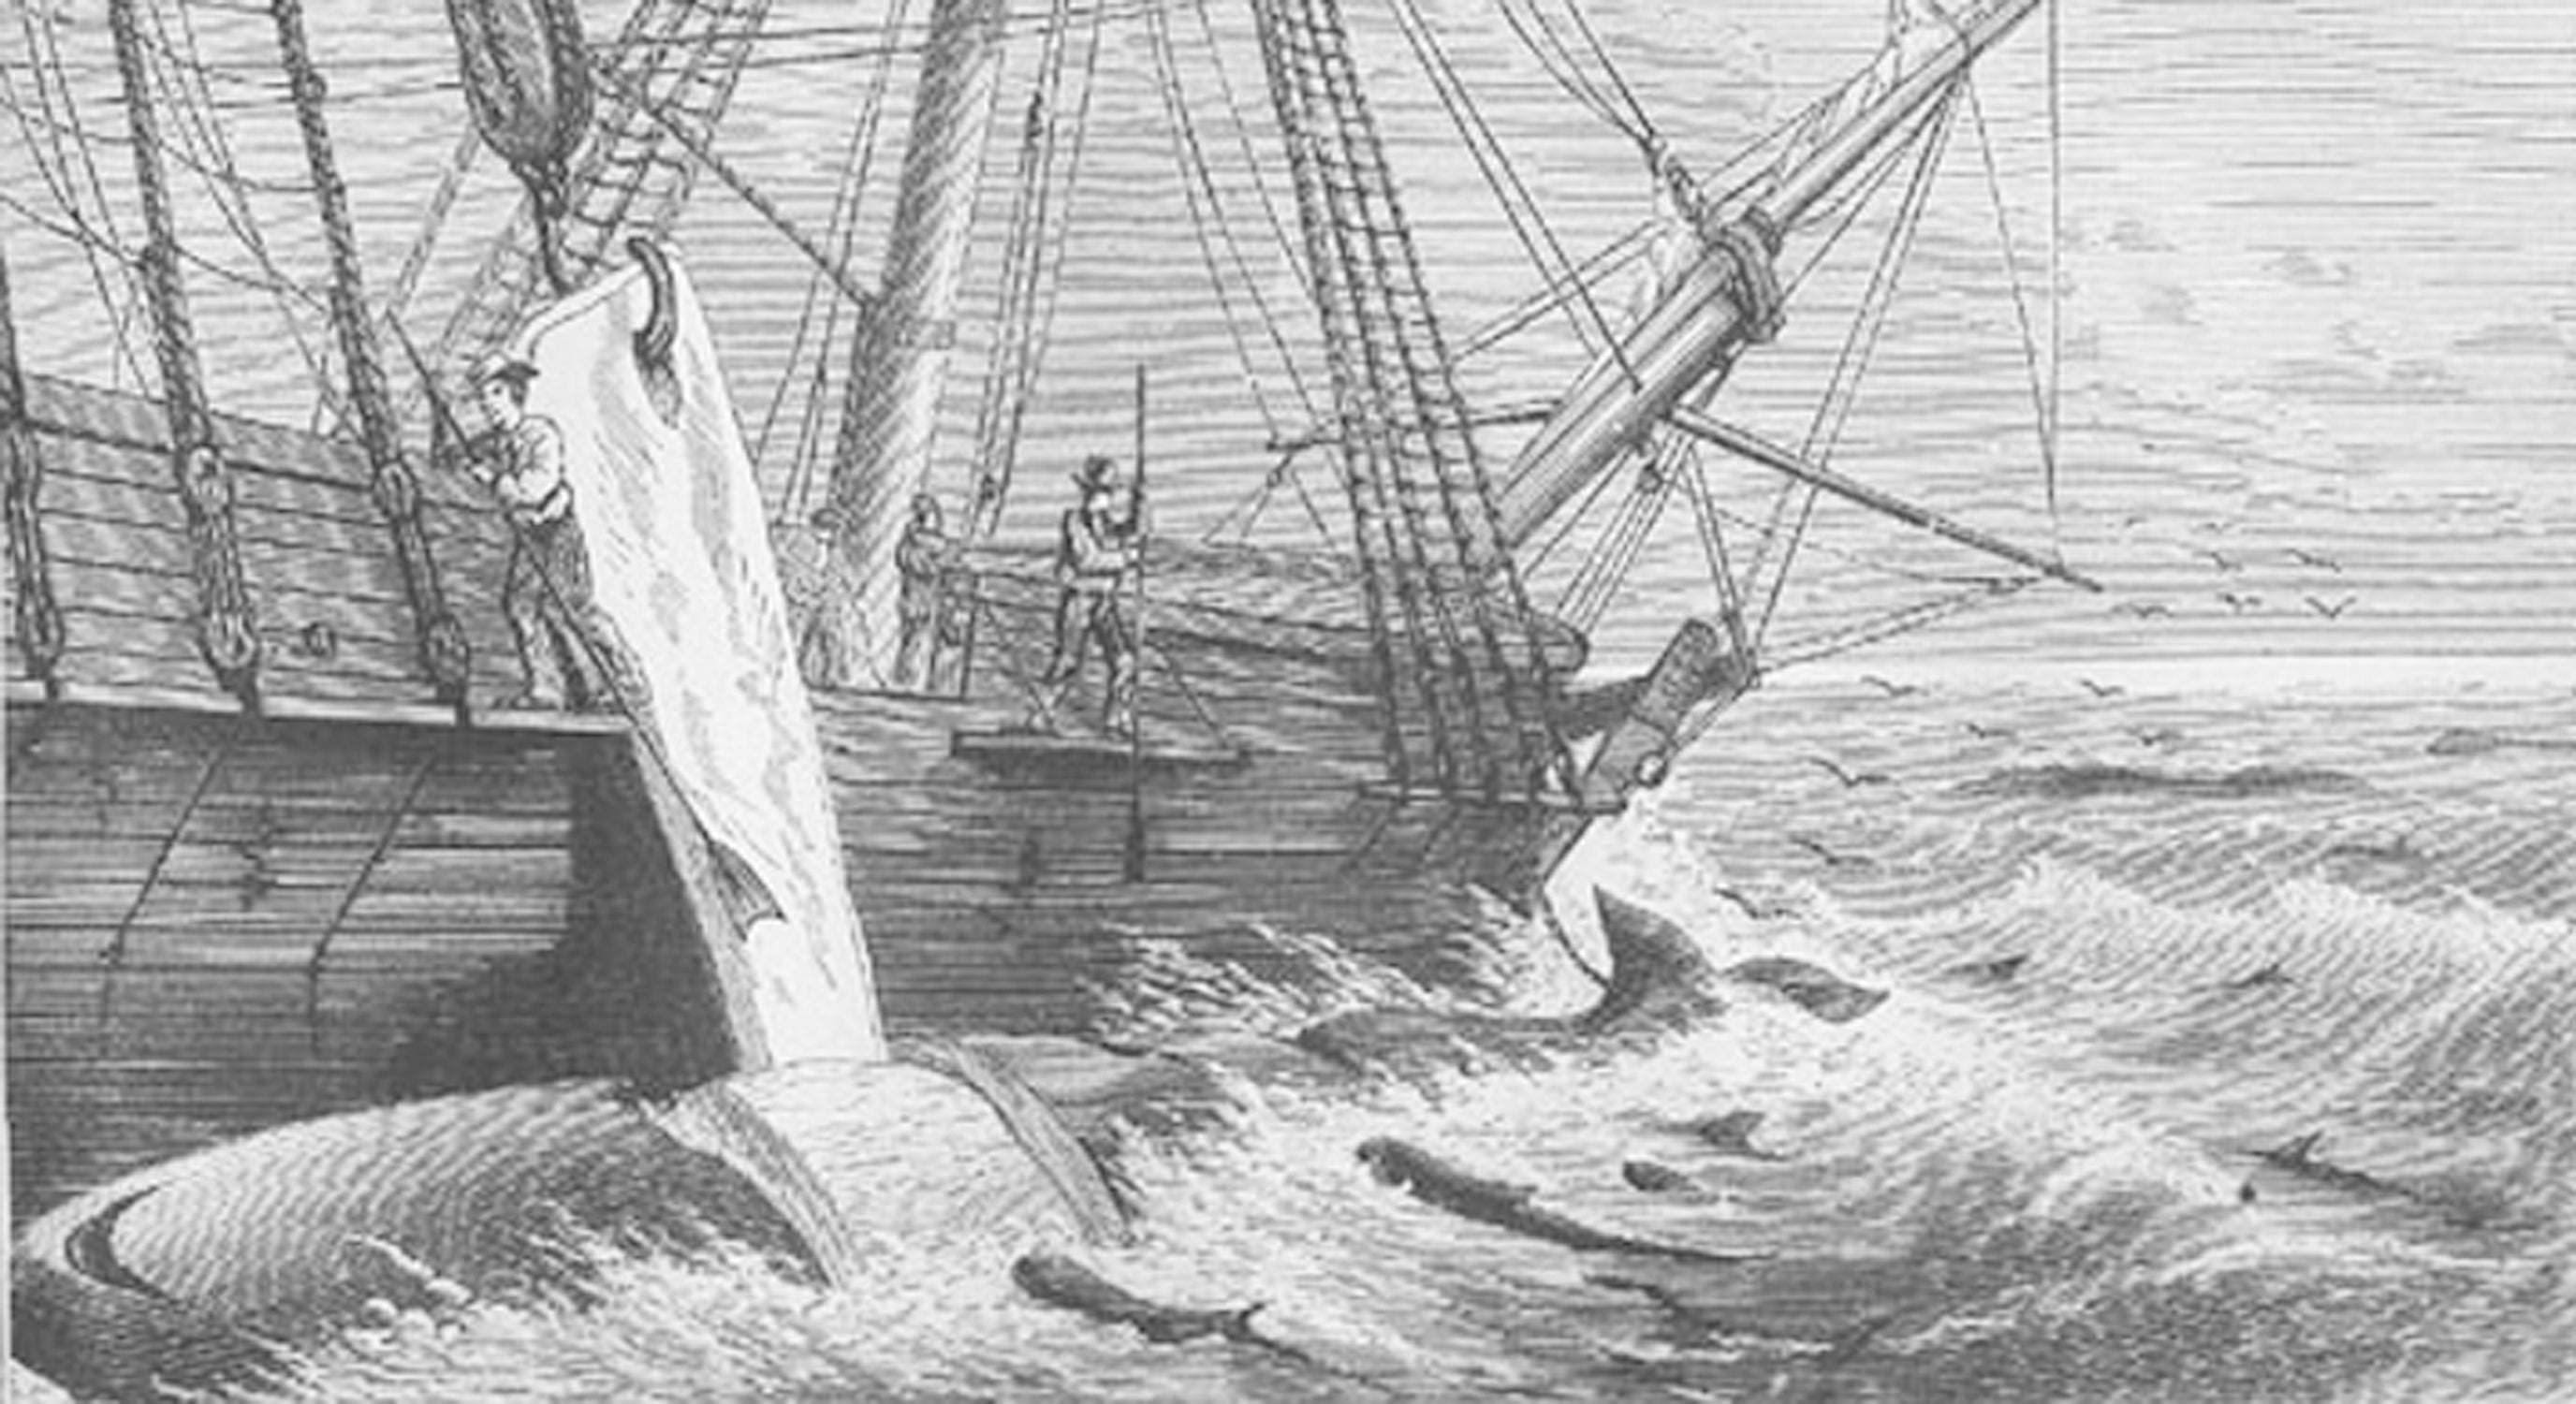 How Nantucket Came to Be the Whaling Capital of the World, History